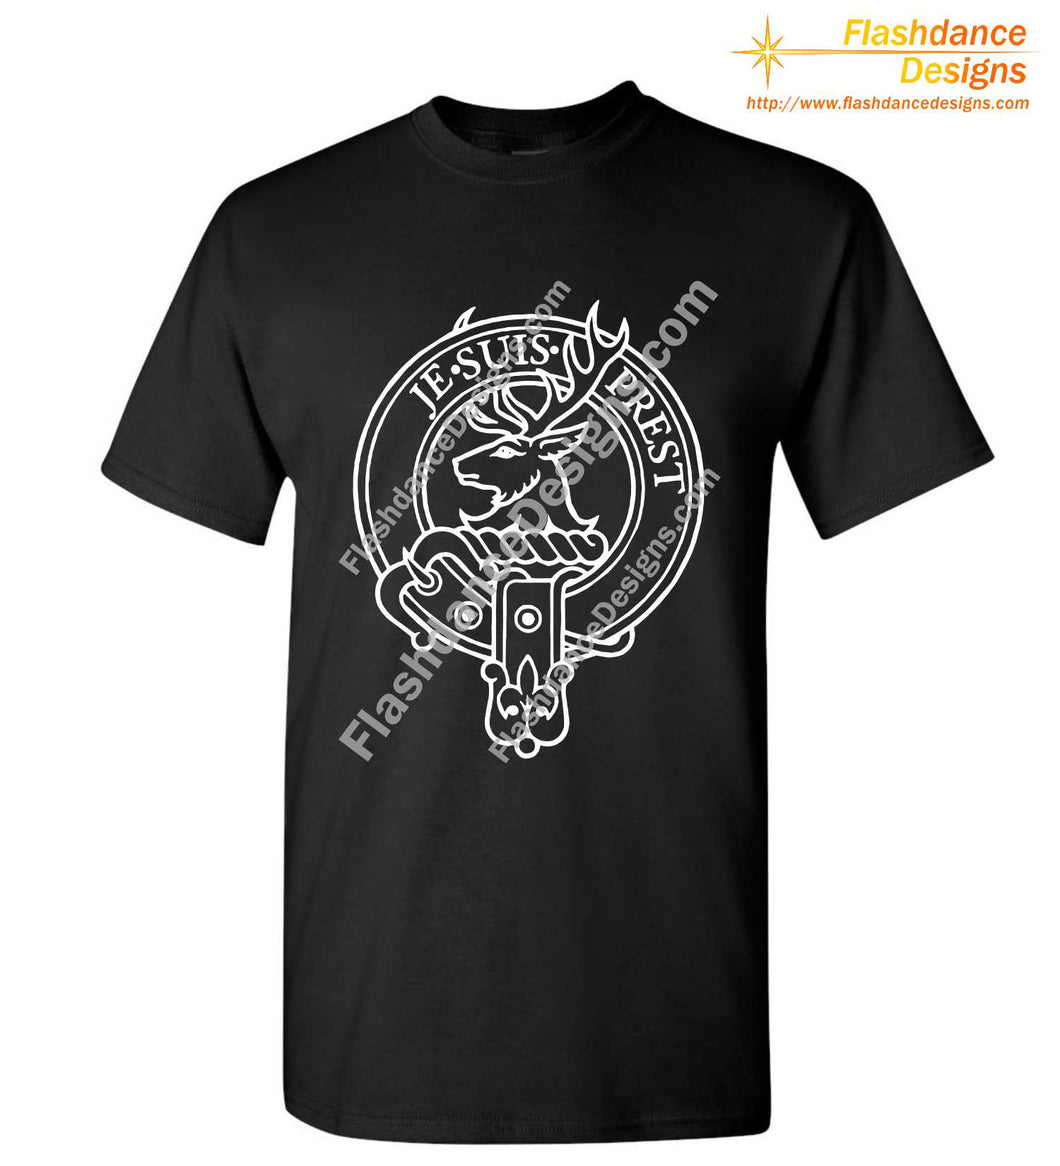 Scottish Clan Crest heavy cotton tee in a unisex / men's fit, showing the Fraser crest in white on a black shirt. Other available clans include Akins, Cambell, Comyn, Cumming, Farquharson, MacGregor, MacKinnon, MacKintosh, Macmillan, Montgomery, Ramsay and Stewart.